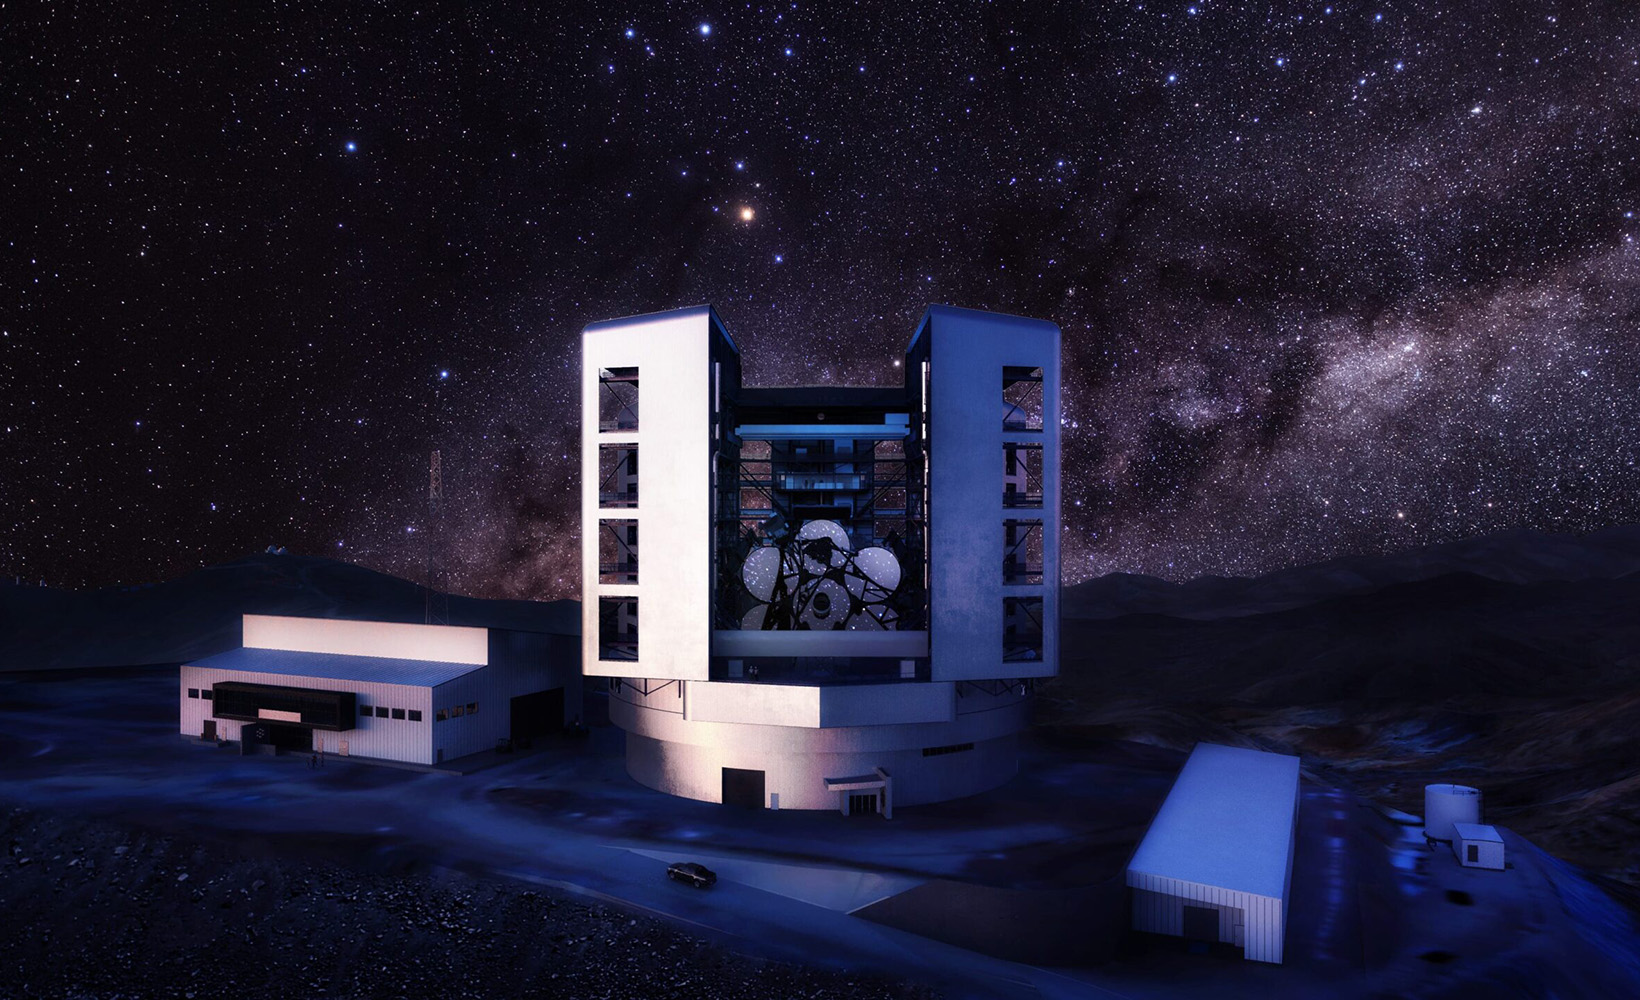 Latest design of the Giant Magellan Telescope enclosure, telescope and site at Las Campanas Observatory in Chile, with a night sky background